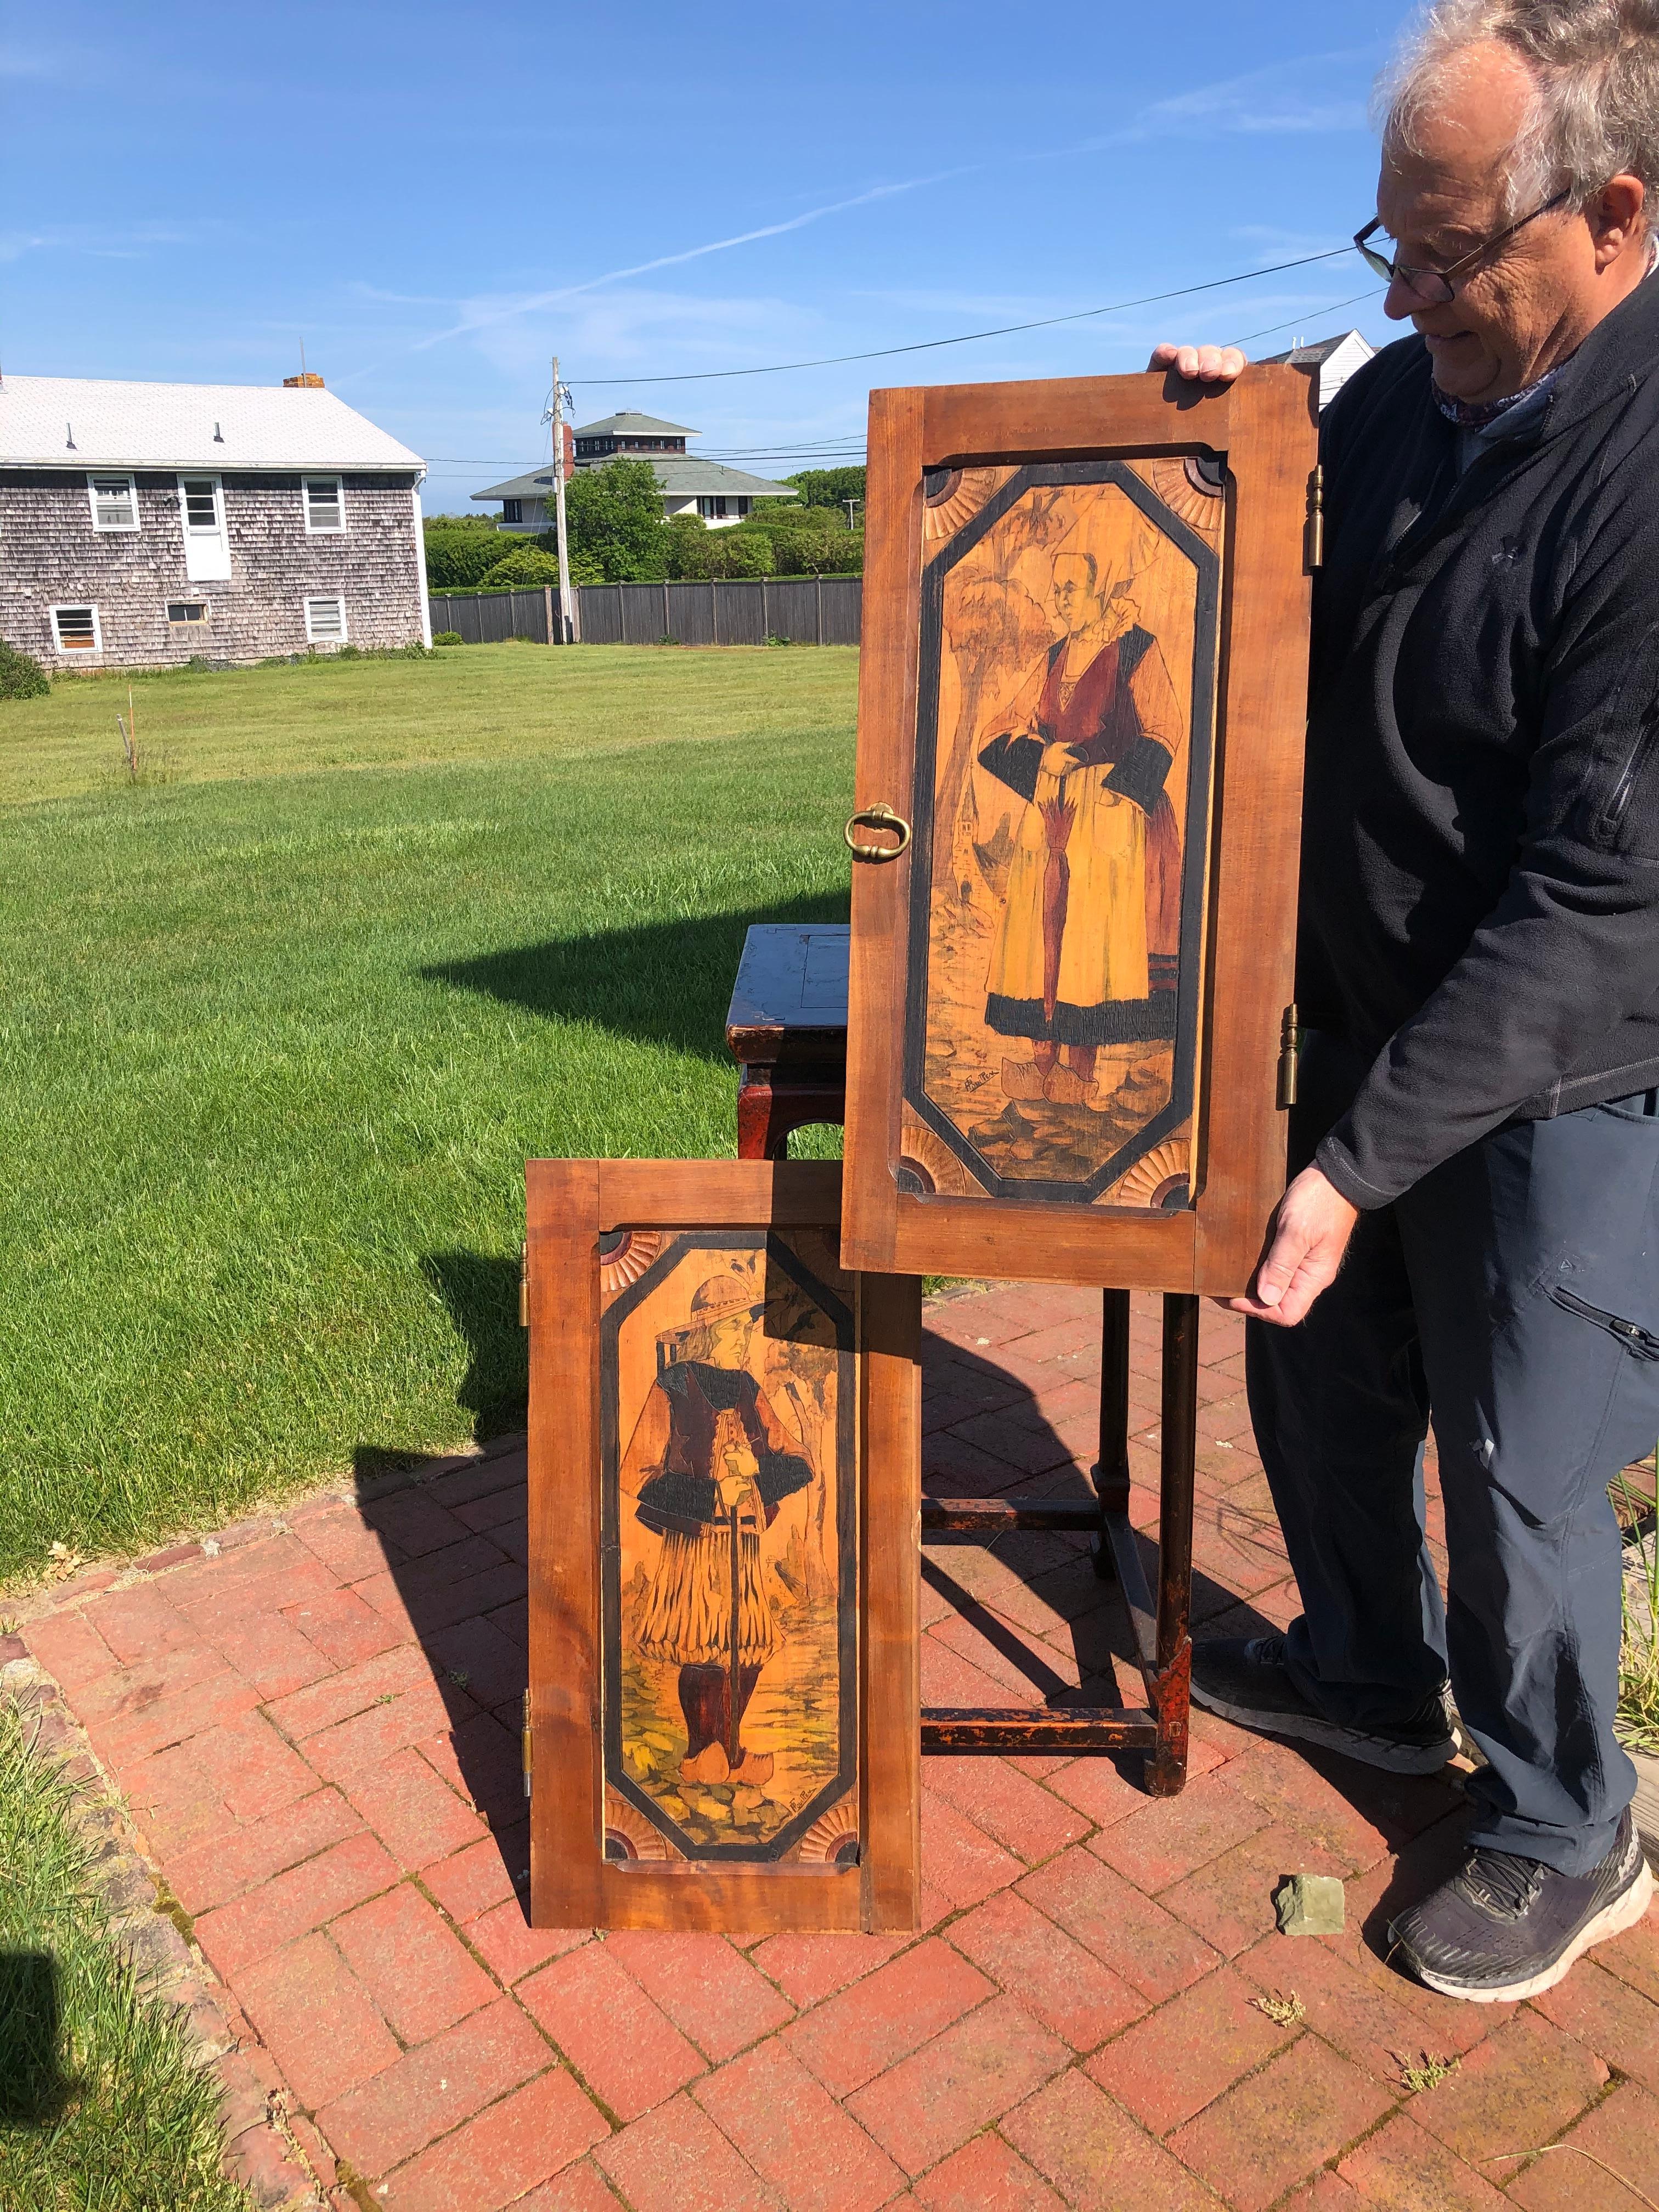 From an old New England collection of fine Arts & Crafts furnishings.

Two large all original unique works of art, circa 1920

This is a beautiful set of two (2) hand incised and signed wooden cabinet panels - all hand incised and hand painted